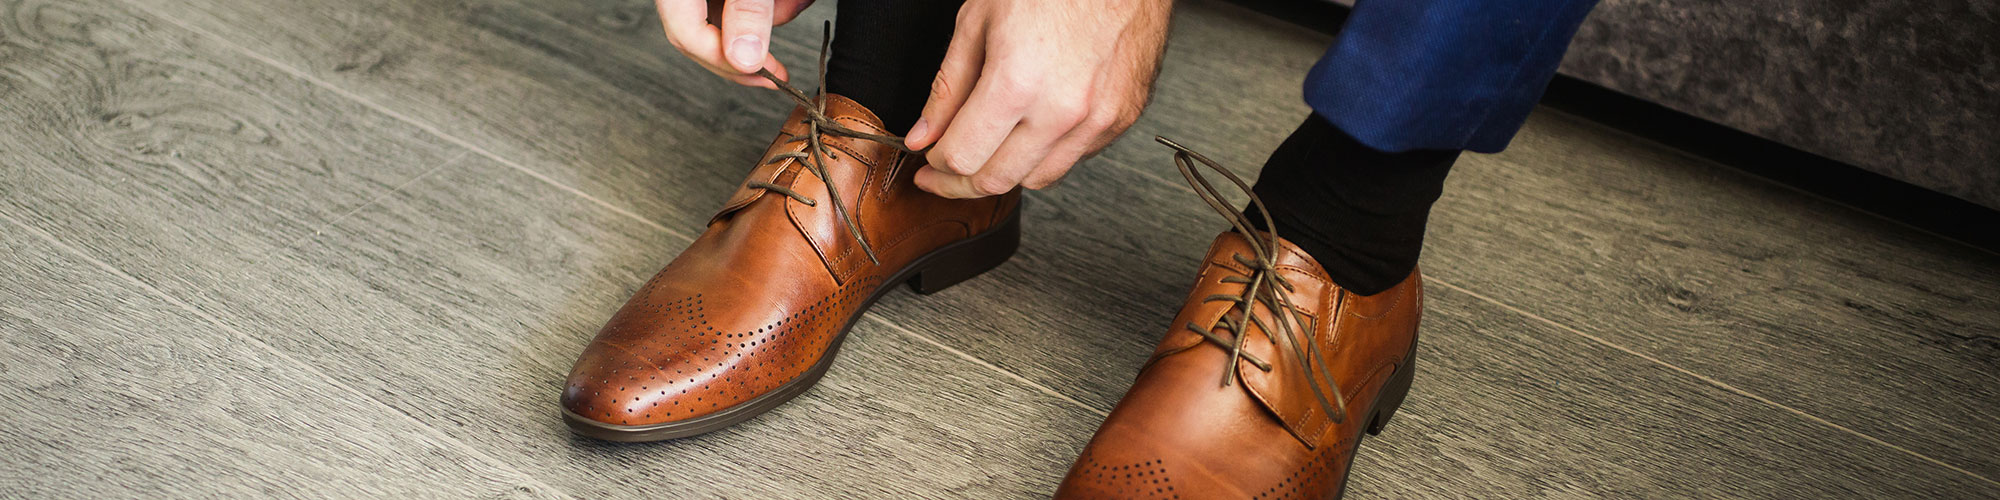 Man Tying His Formal Shoes